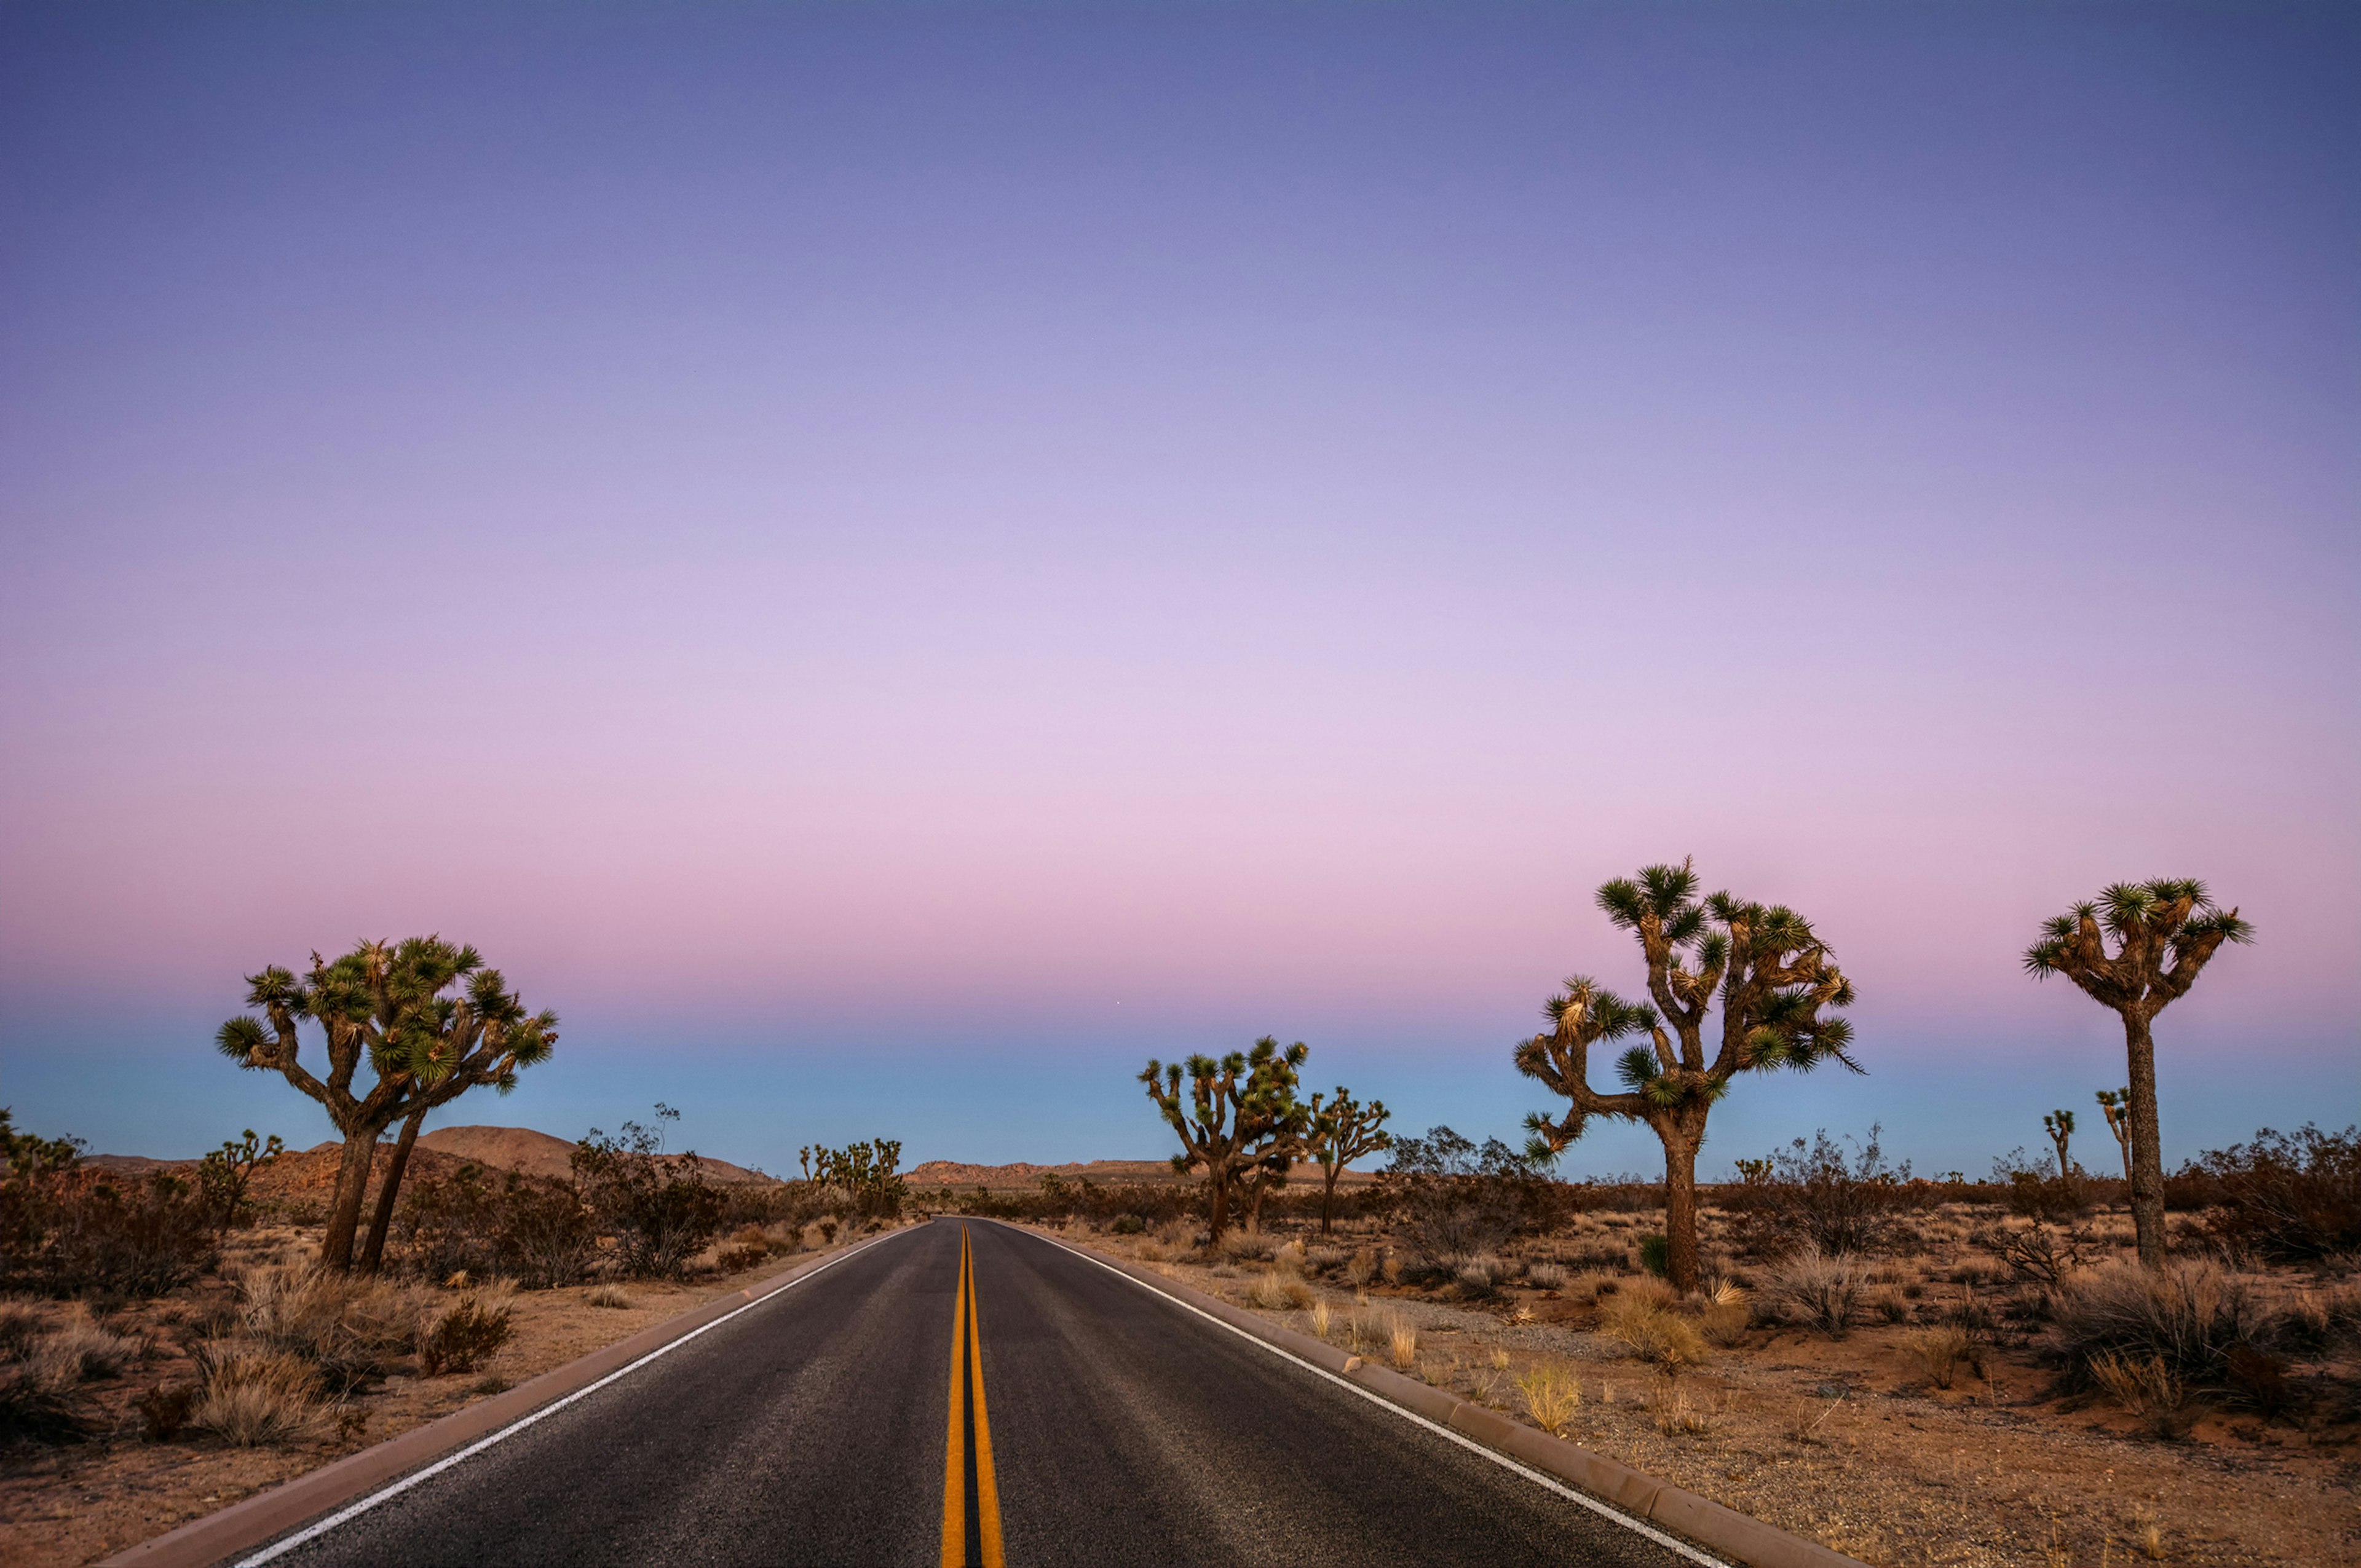 Driving through the desert, sparse trees along the road, during sunset